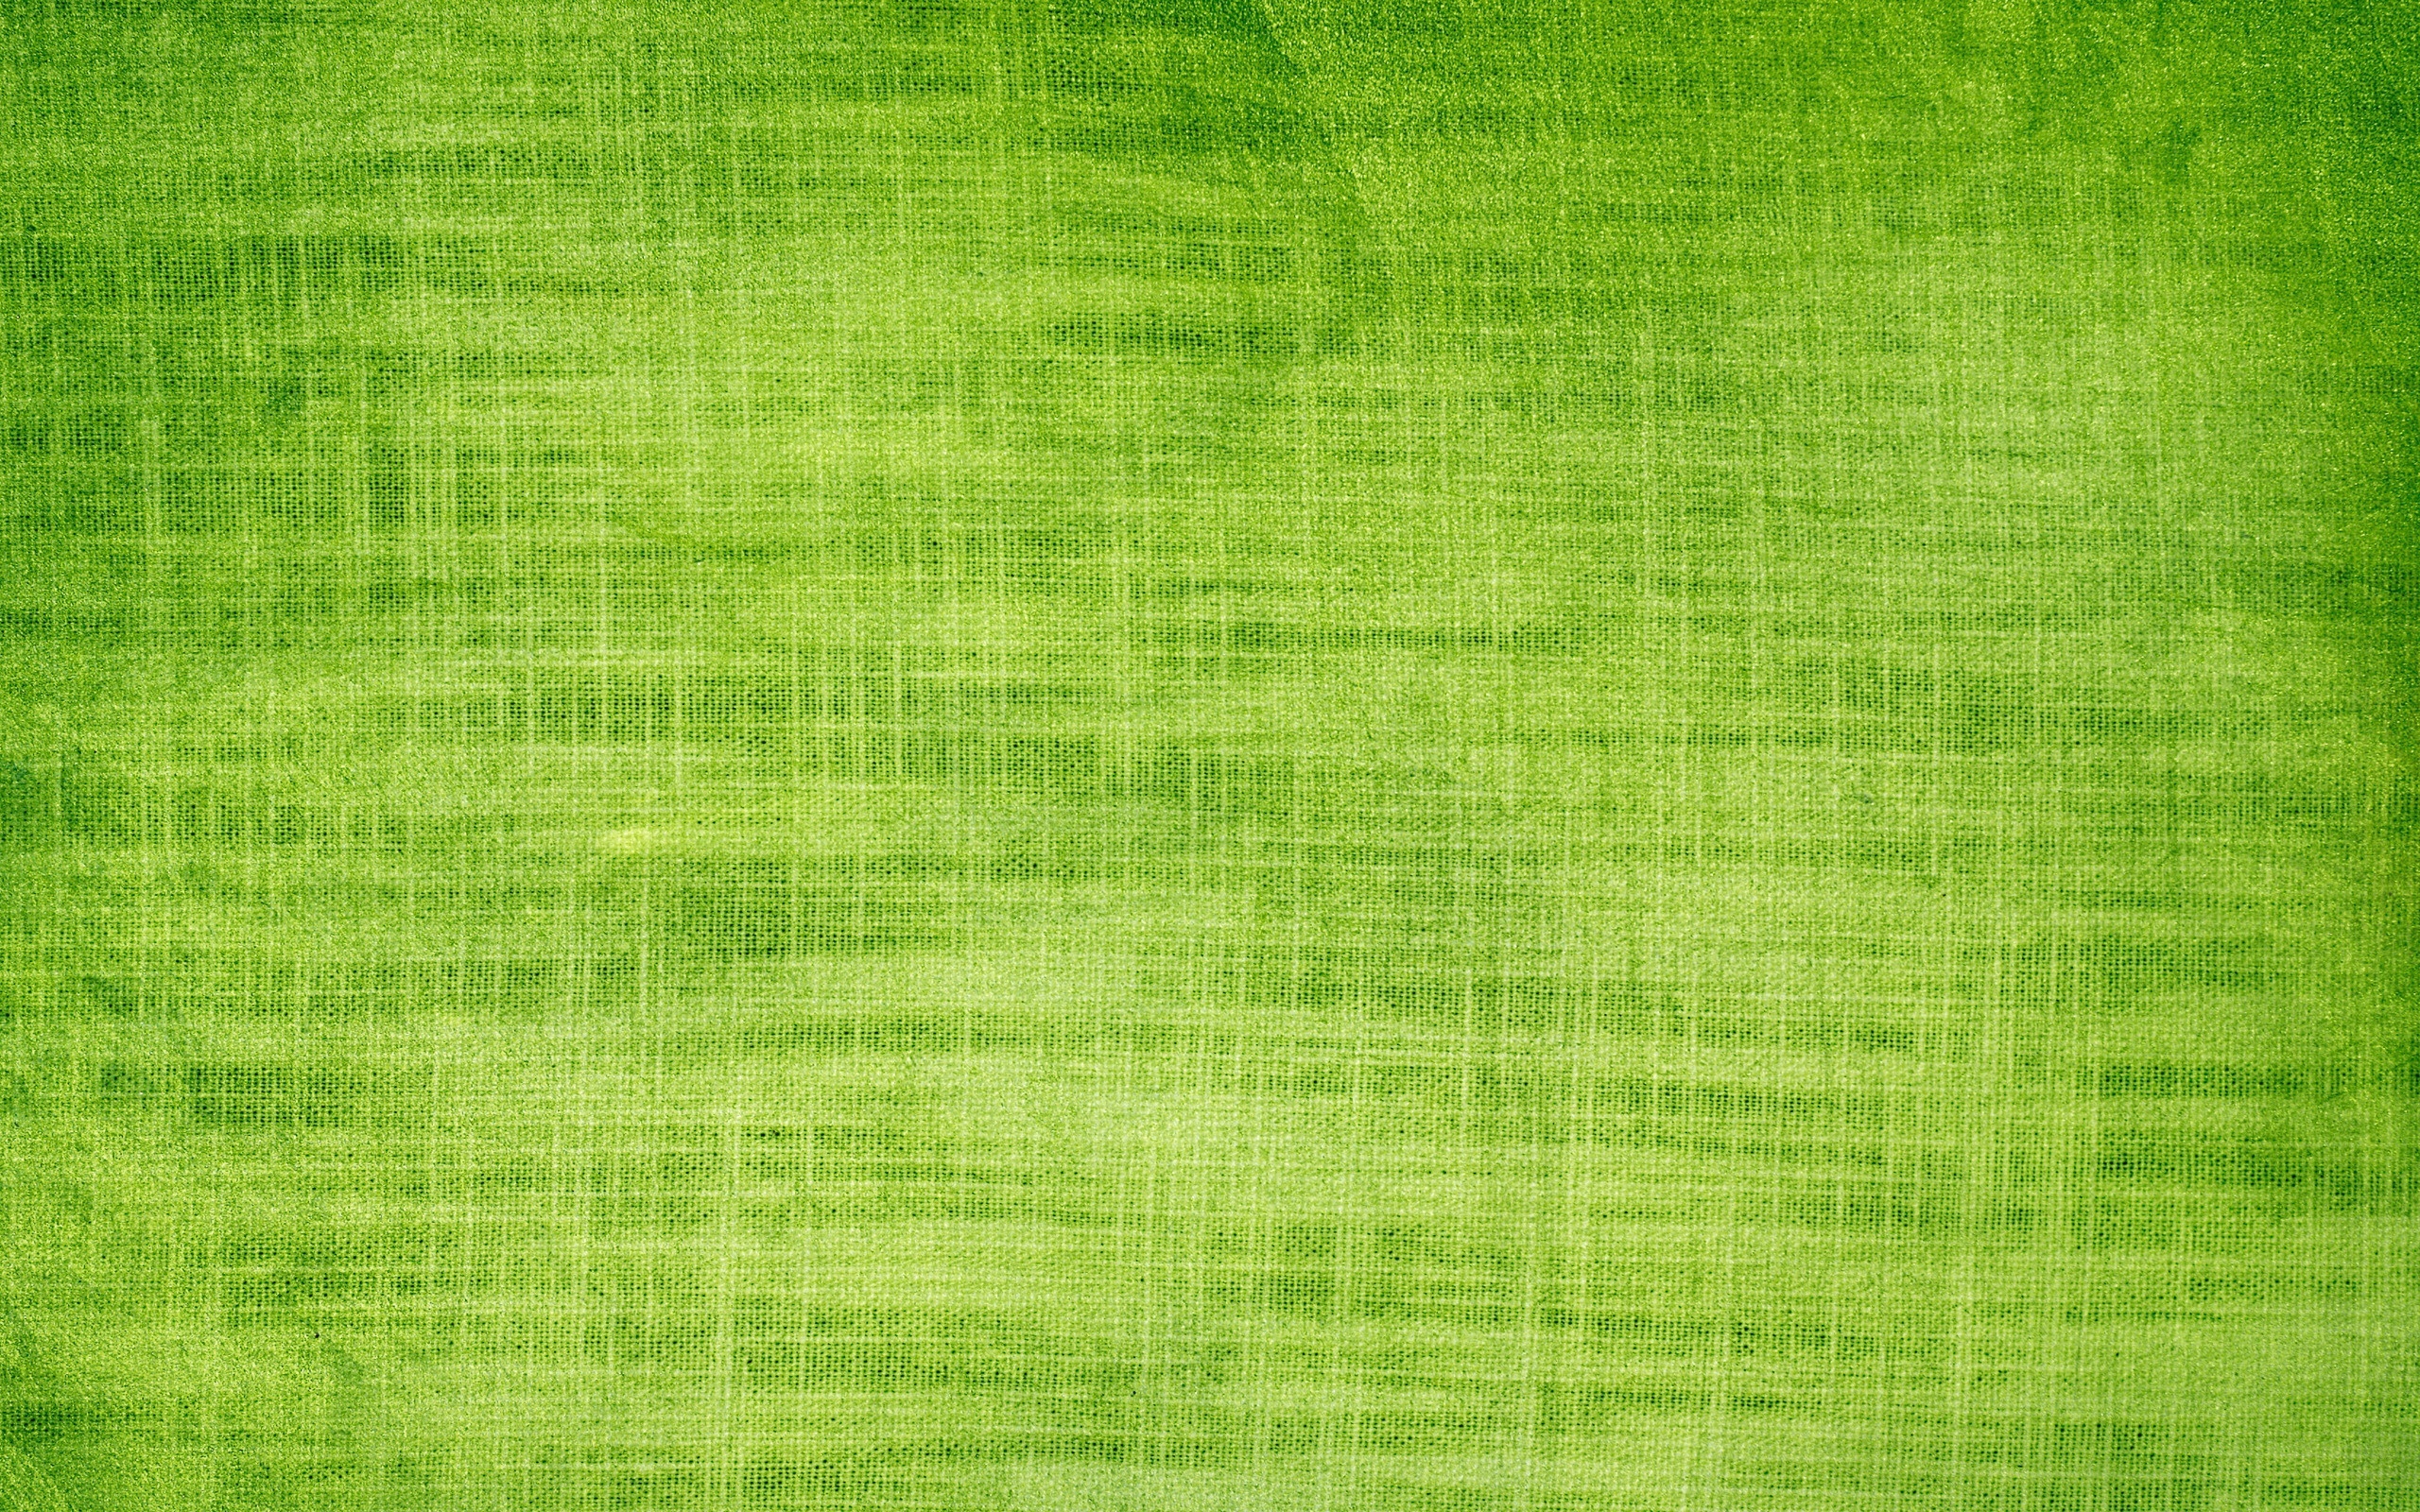 Green Abstract Windows Wallpaper All For